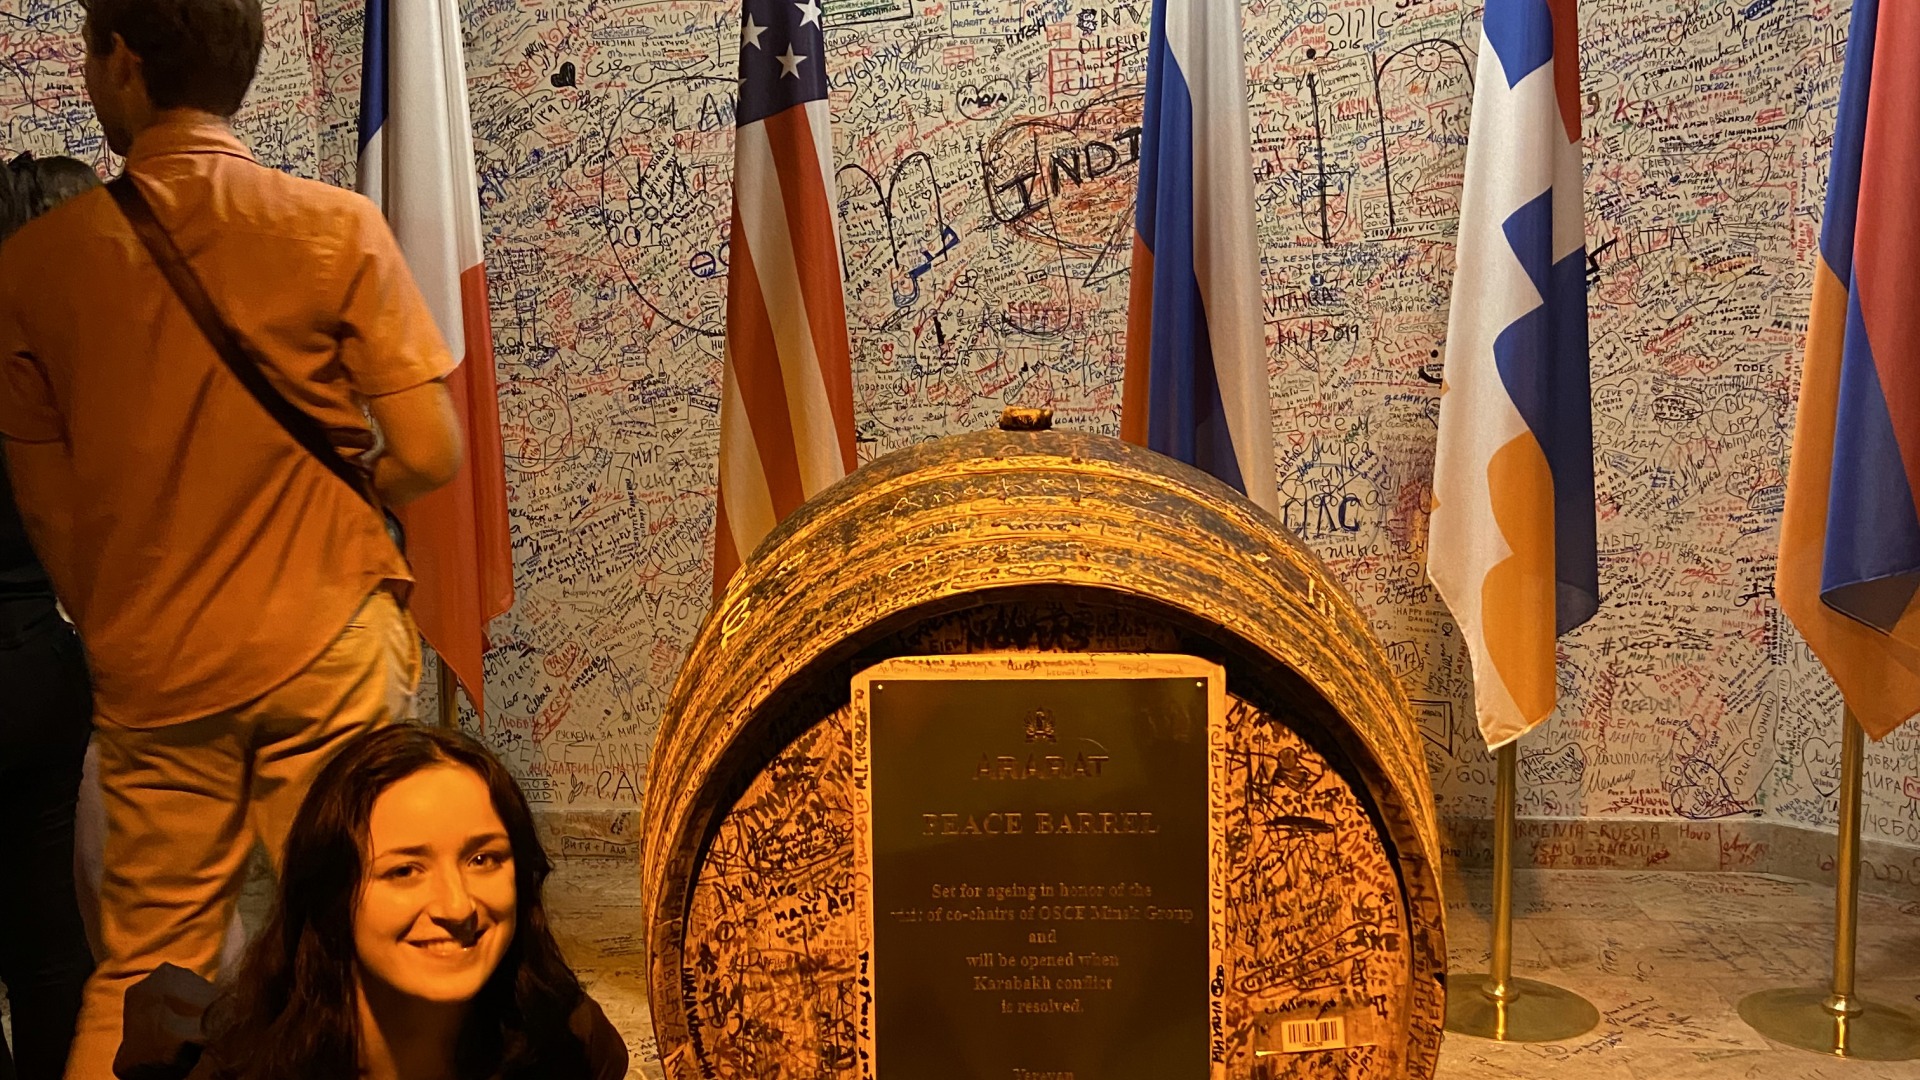 Sophie standing next to a barrel with a plaque reading Peace Barrel and covered in signatures